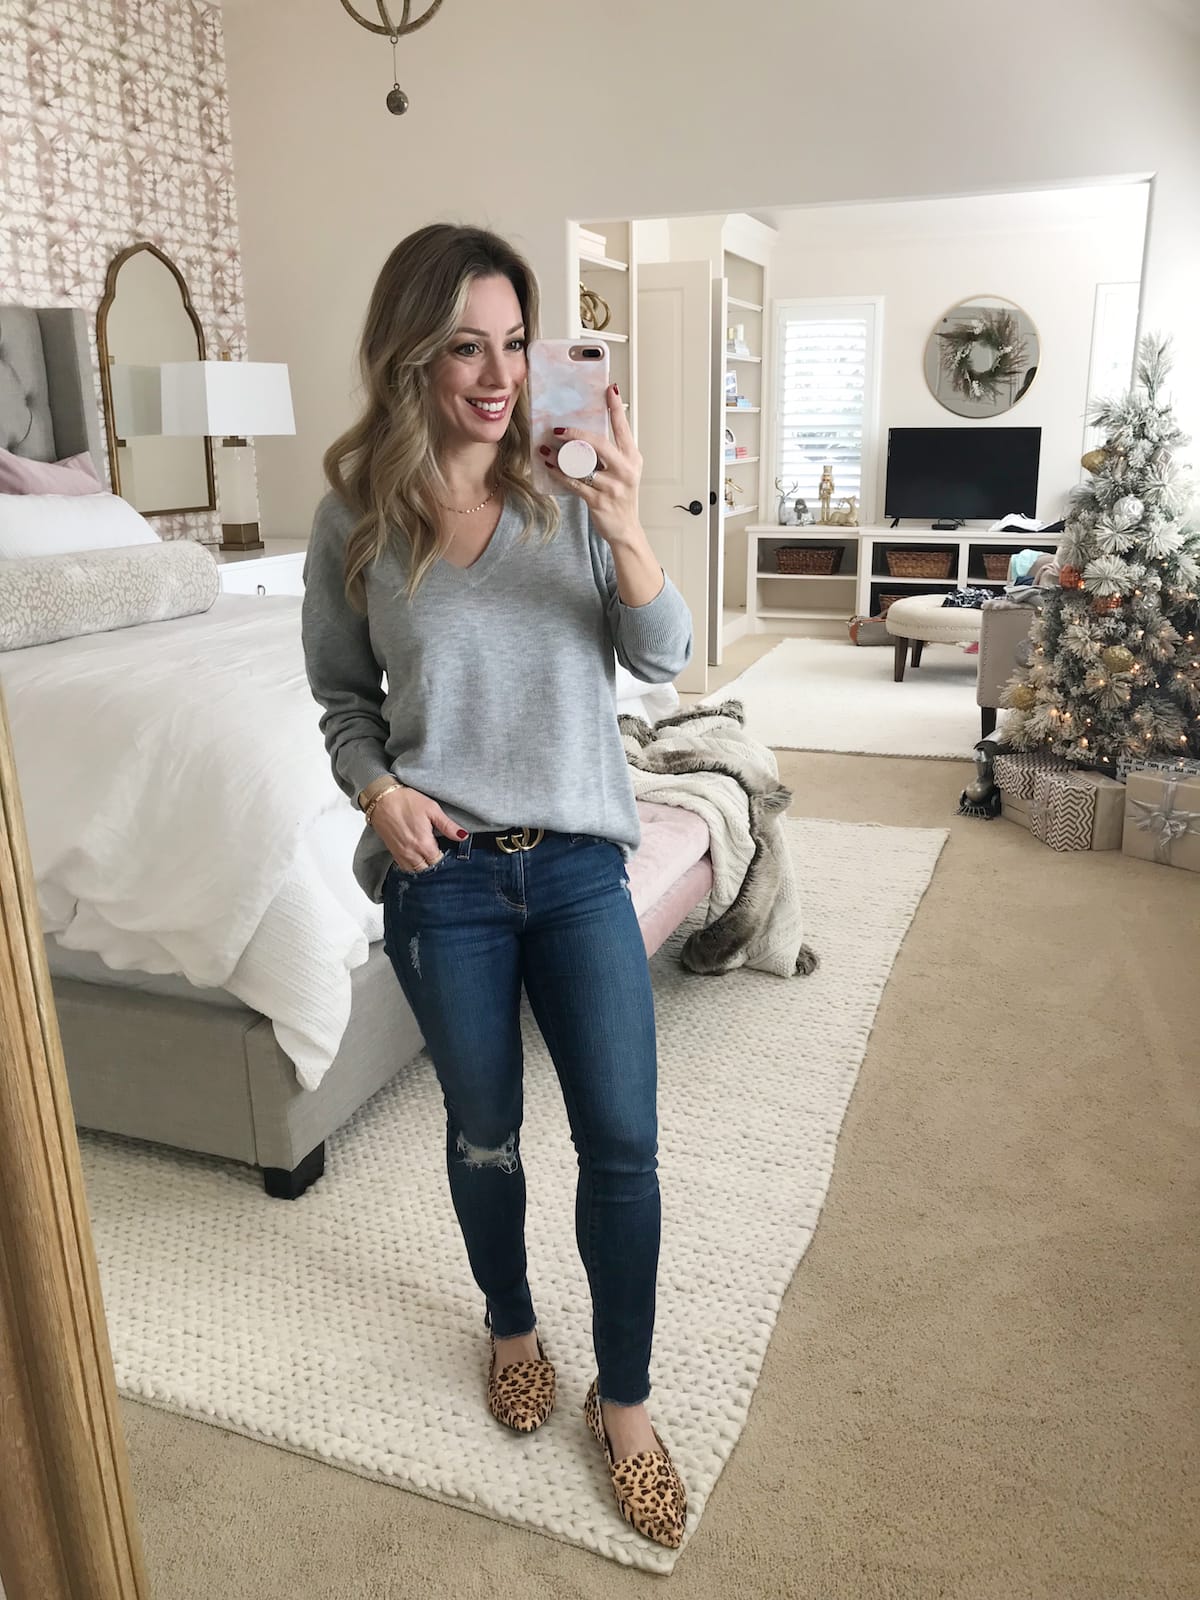 Amazon Fashion Haul - jeans and grey pullover